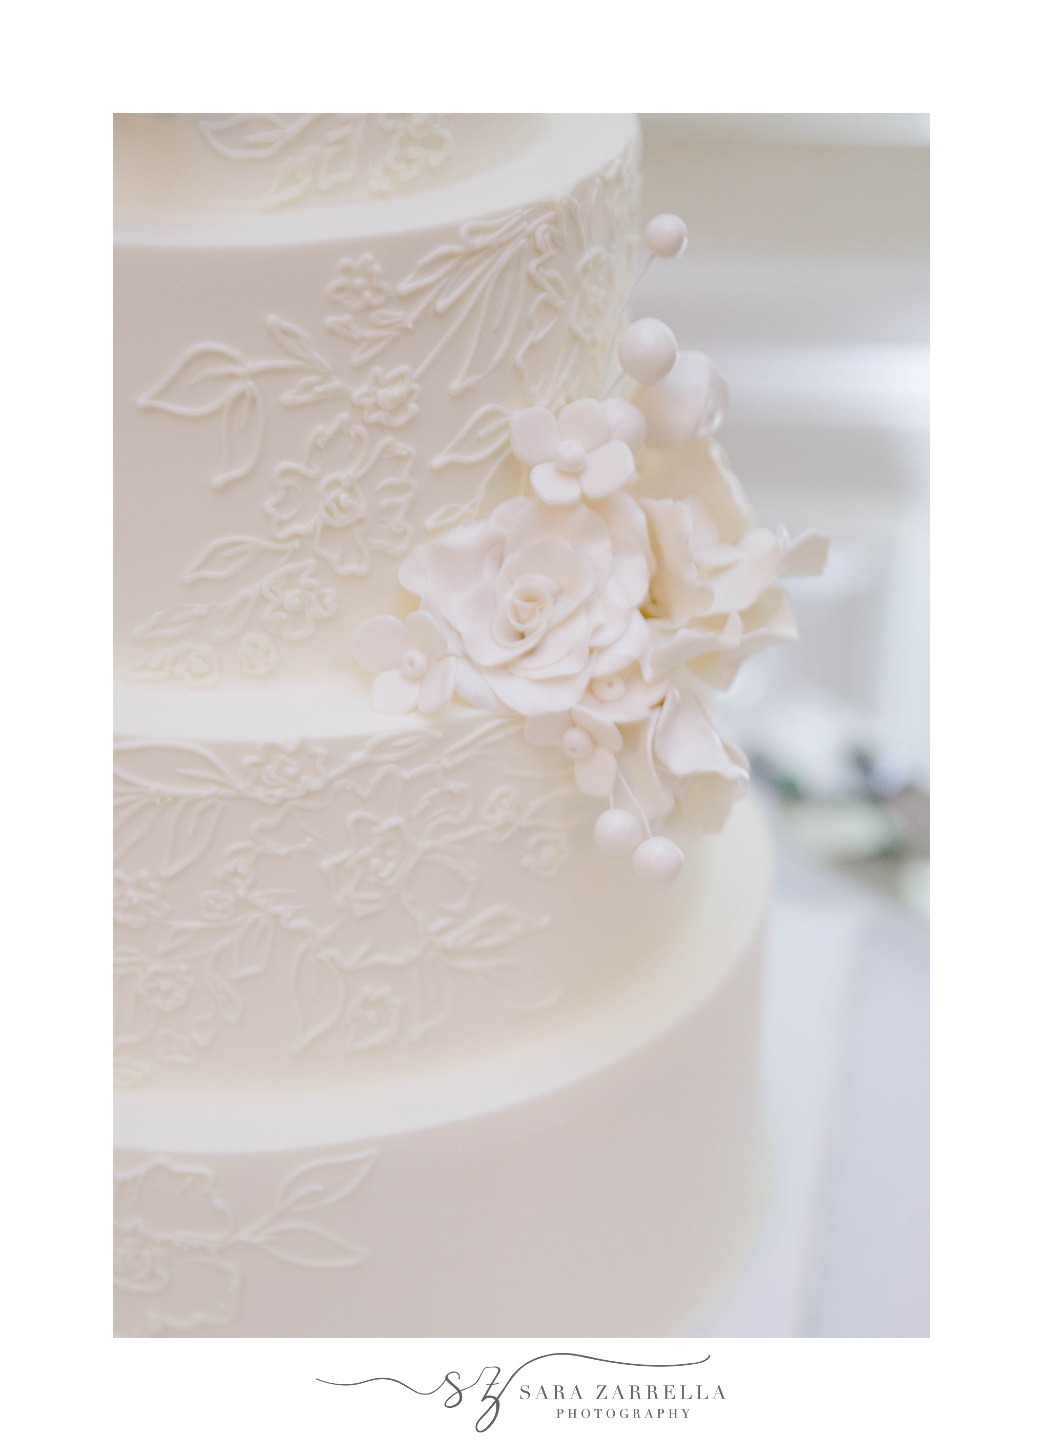 white wedding cake with icing details 